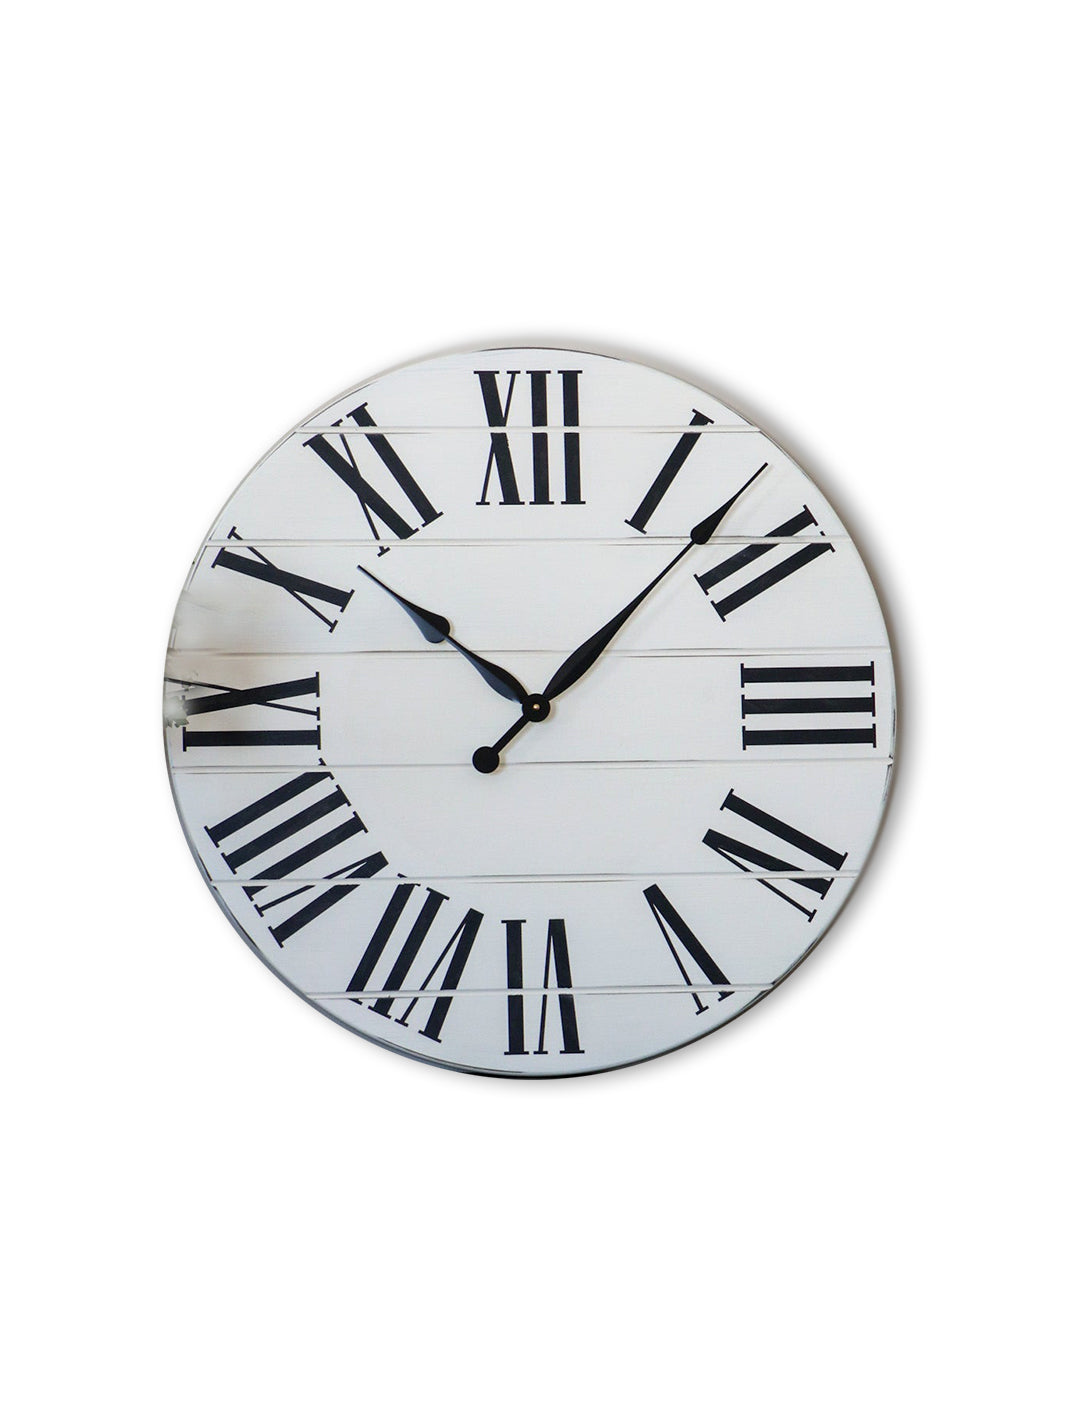 Simple 30" Farmhouse Style Large White Distressed Wall Clock with Black Roman Numerals (in stock) Earthly Comfort Clocks 2089